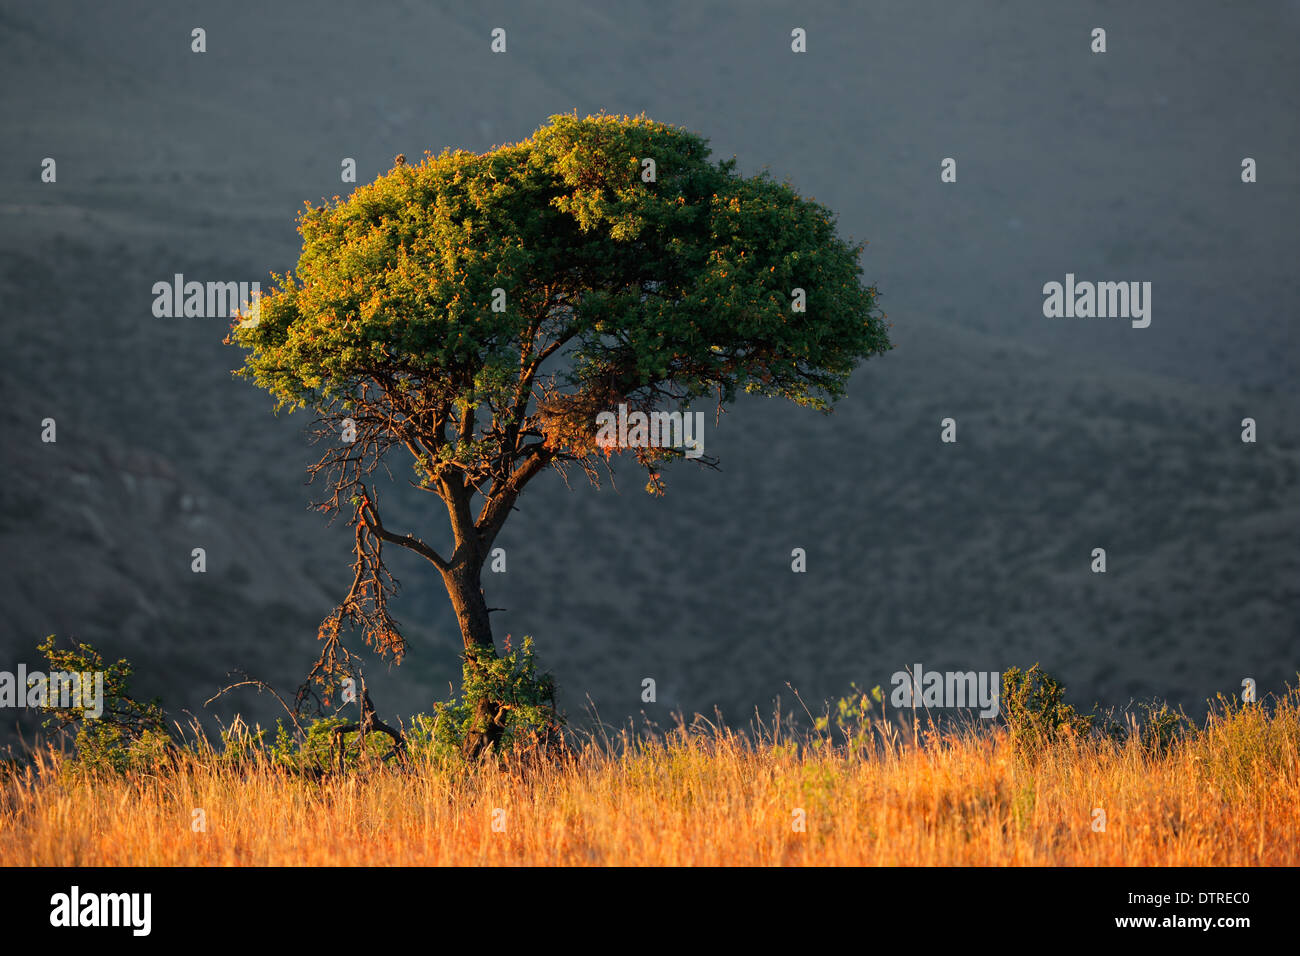 African landscape with a tree on a grassy ridge in early morning light Stock Photo